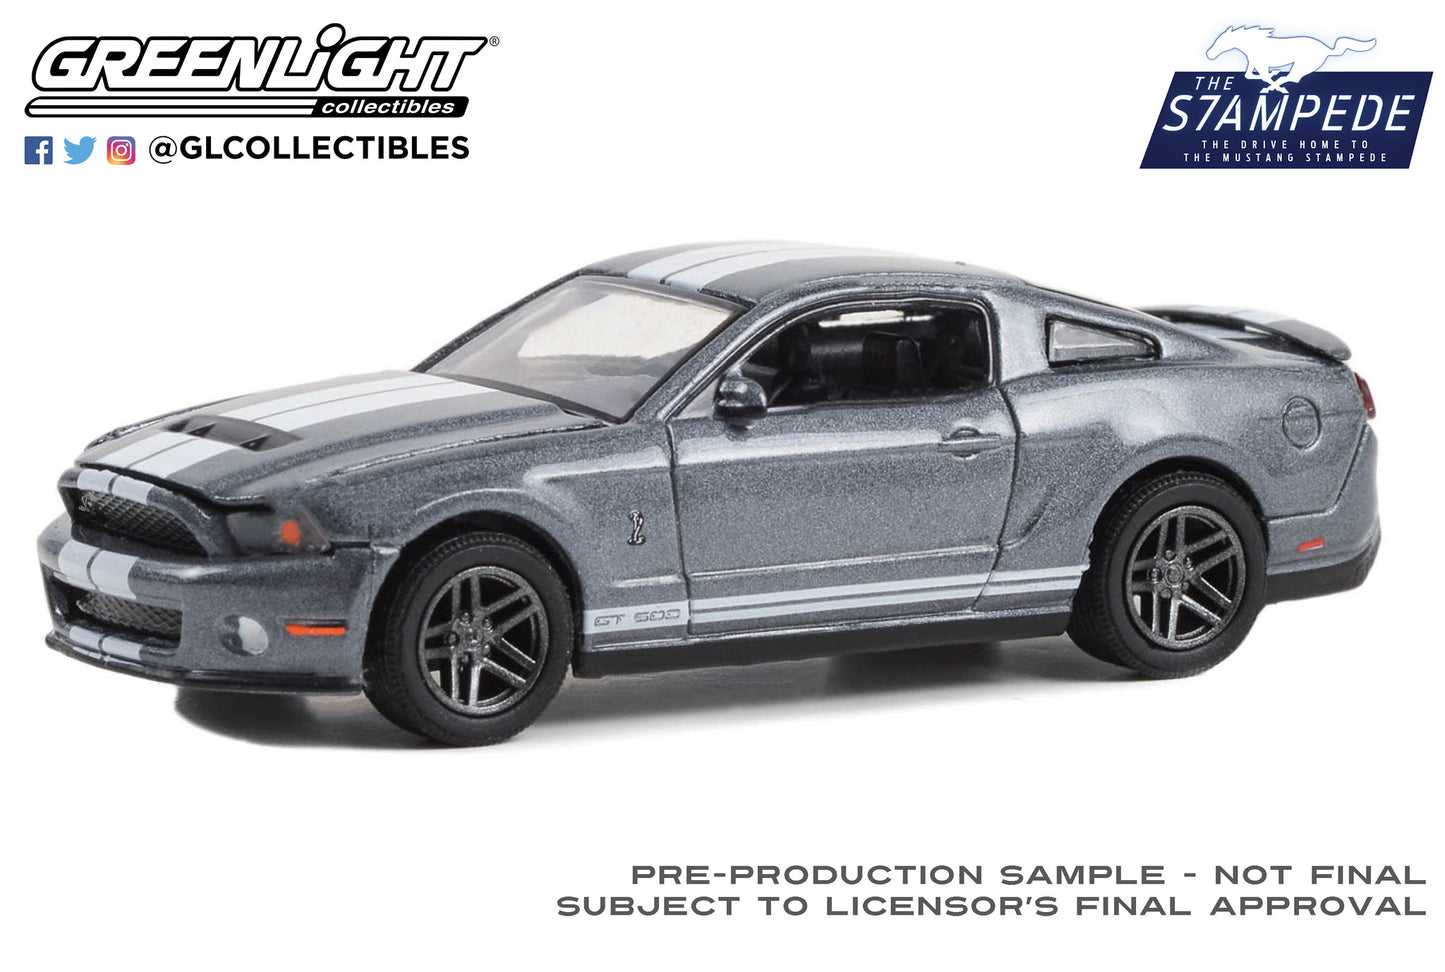 GreenLight 1:64 The Drive Home to the Mustang Stampede Series 1 - 2010 Ford Shelby GT500 - Sterling Grey Metallic with White Stripes 13340-D